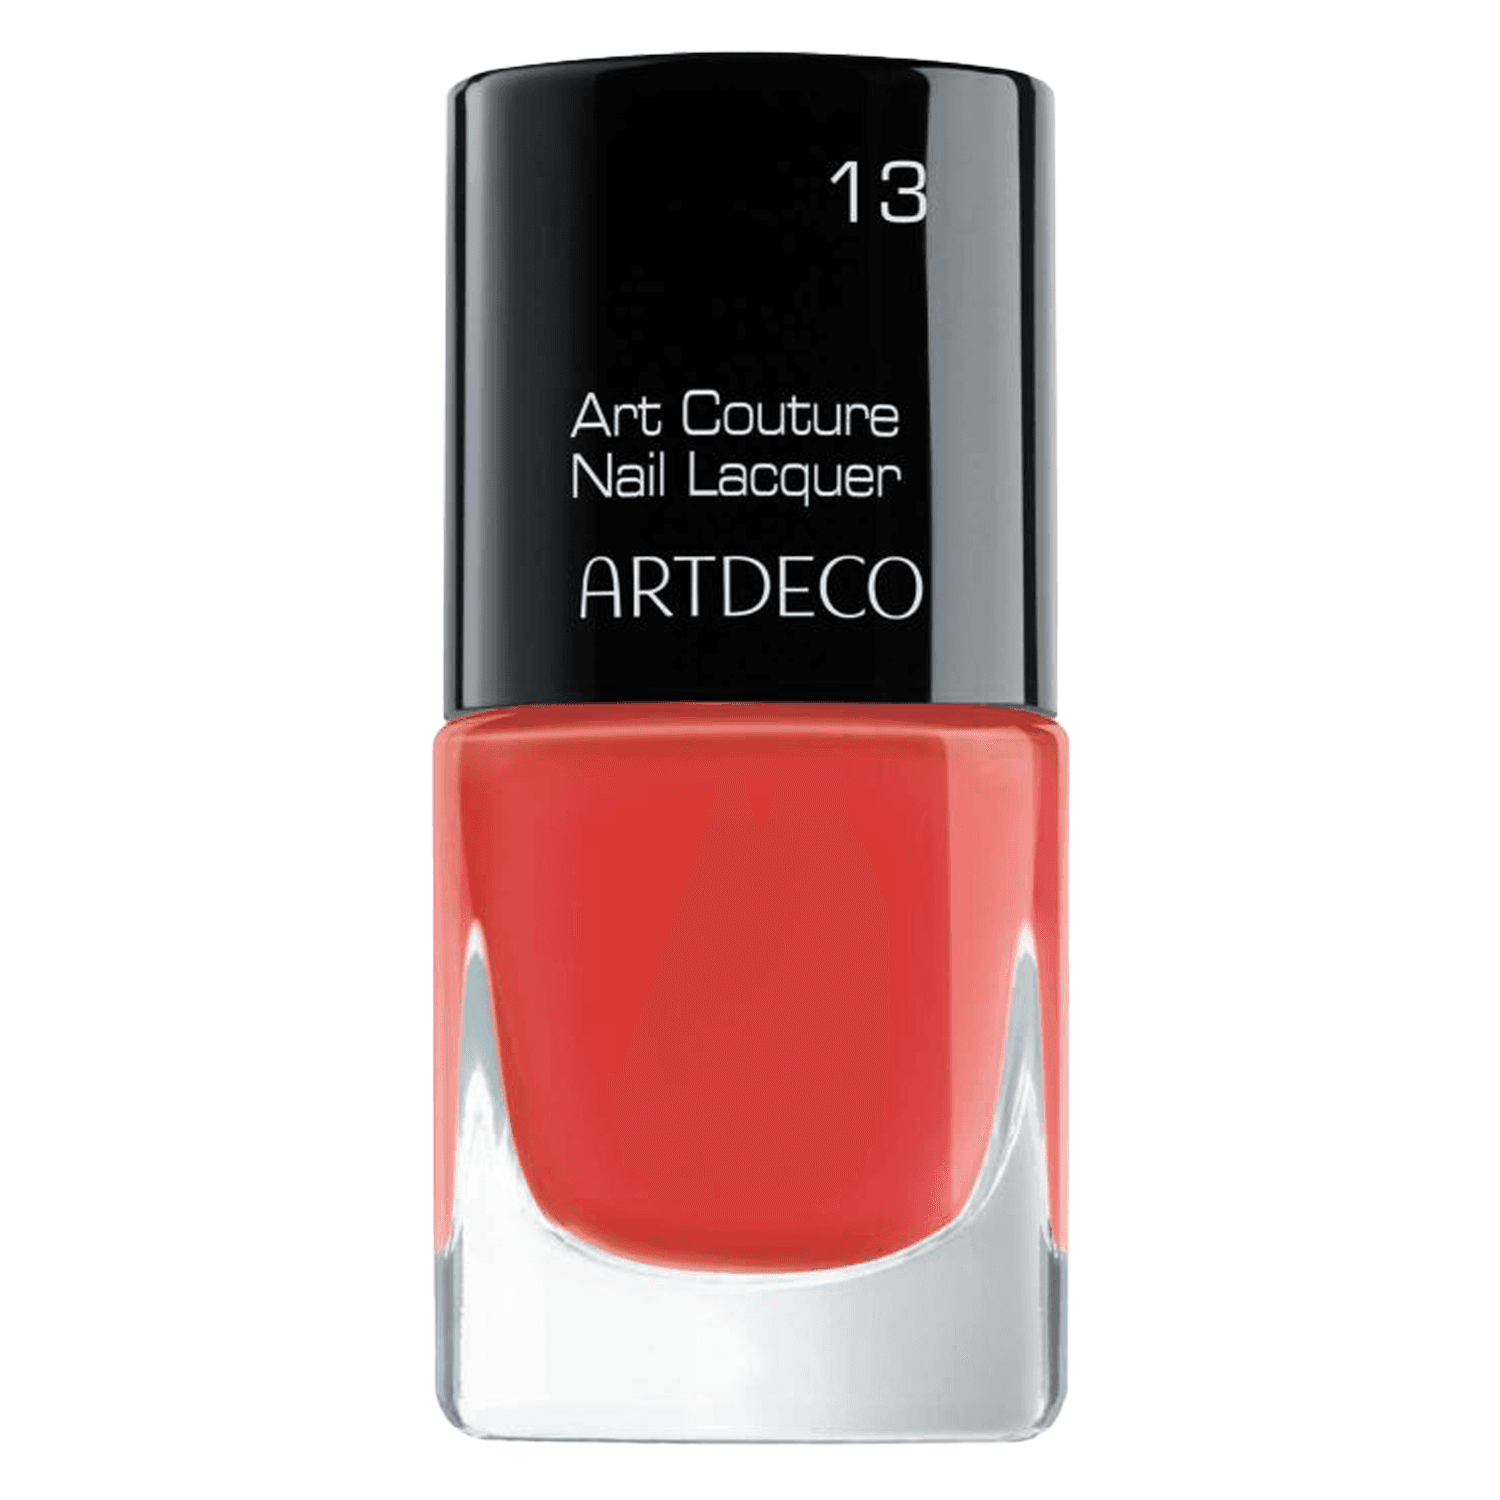 Art Couture - Nail Lacquer Poppy Blossom 13